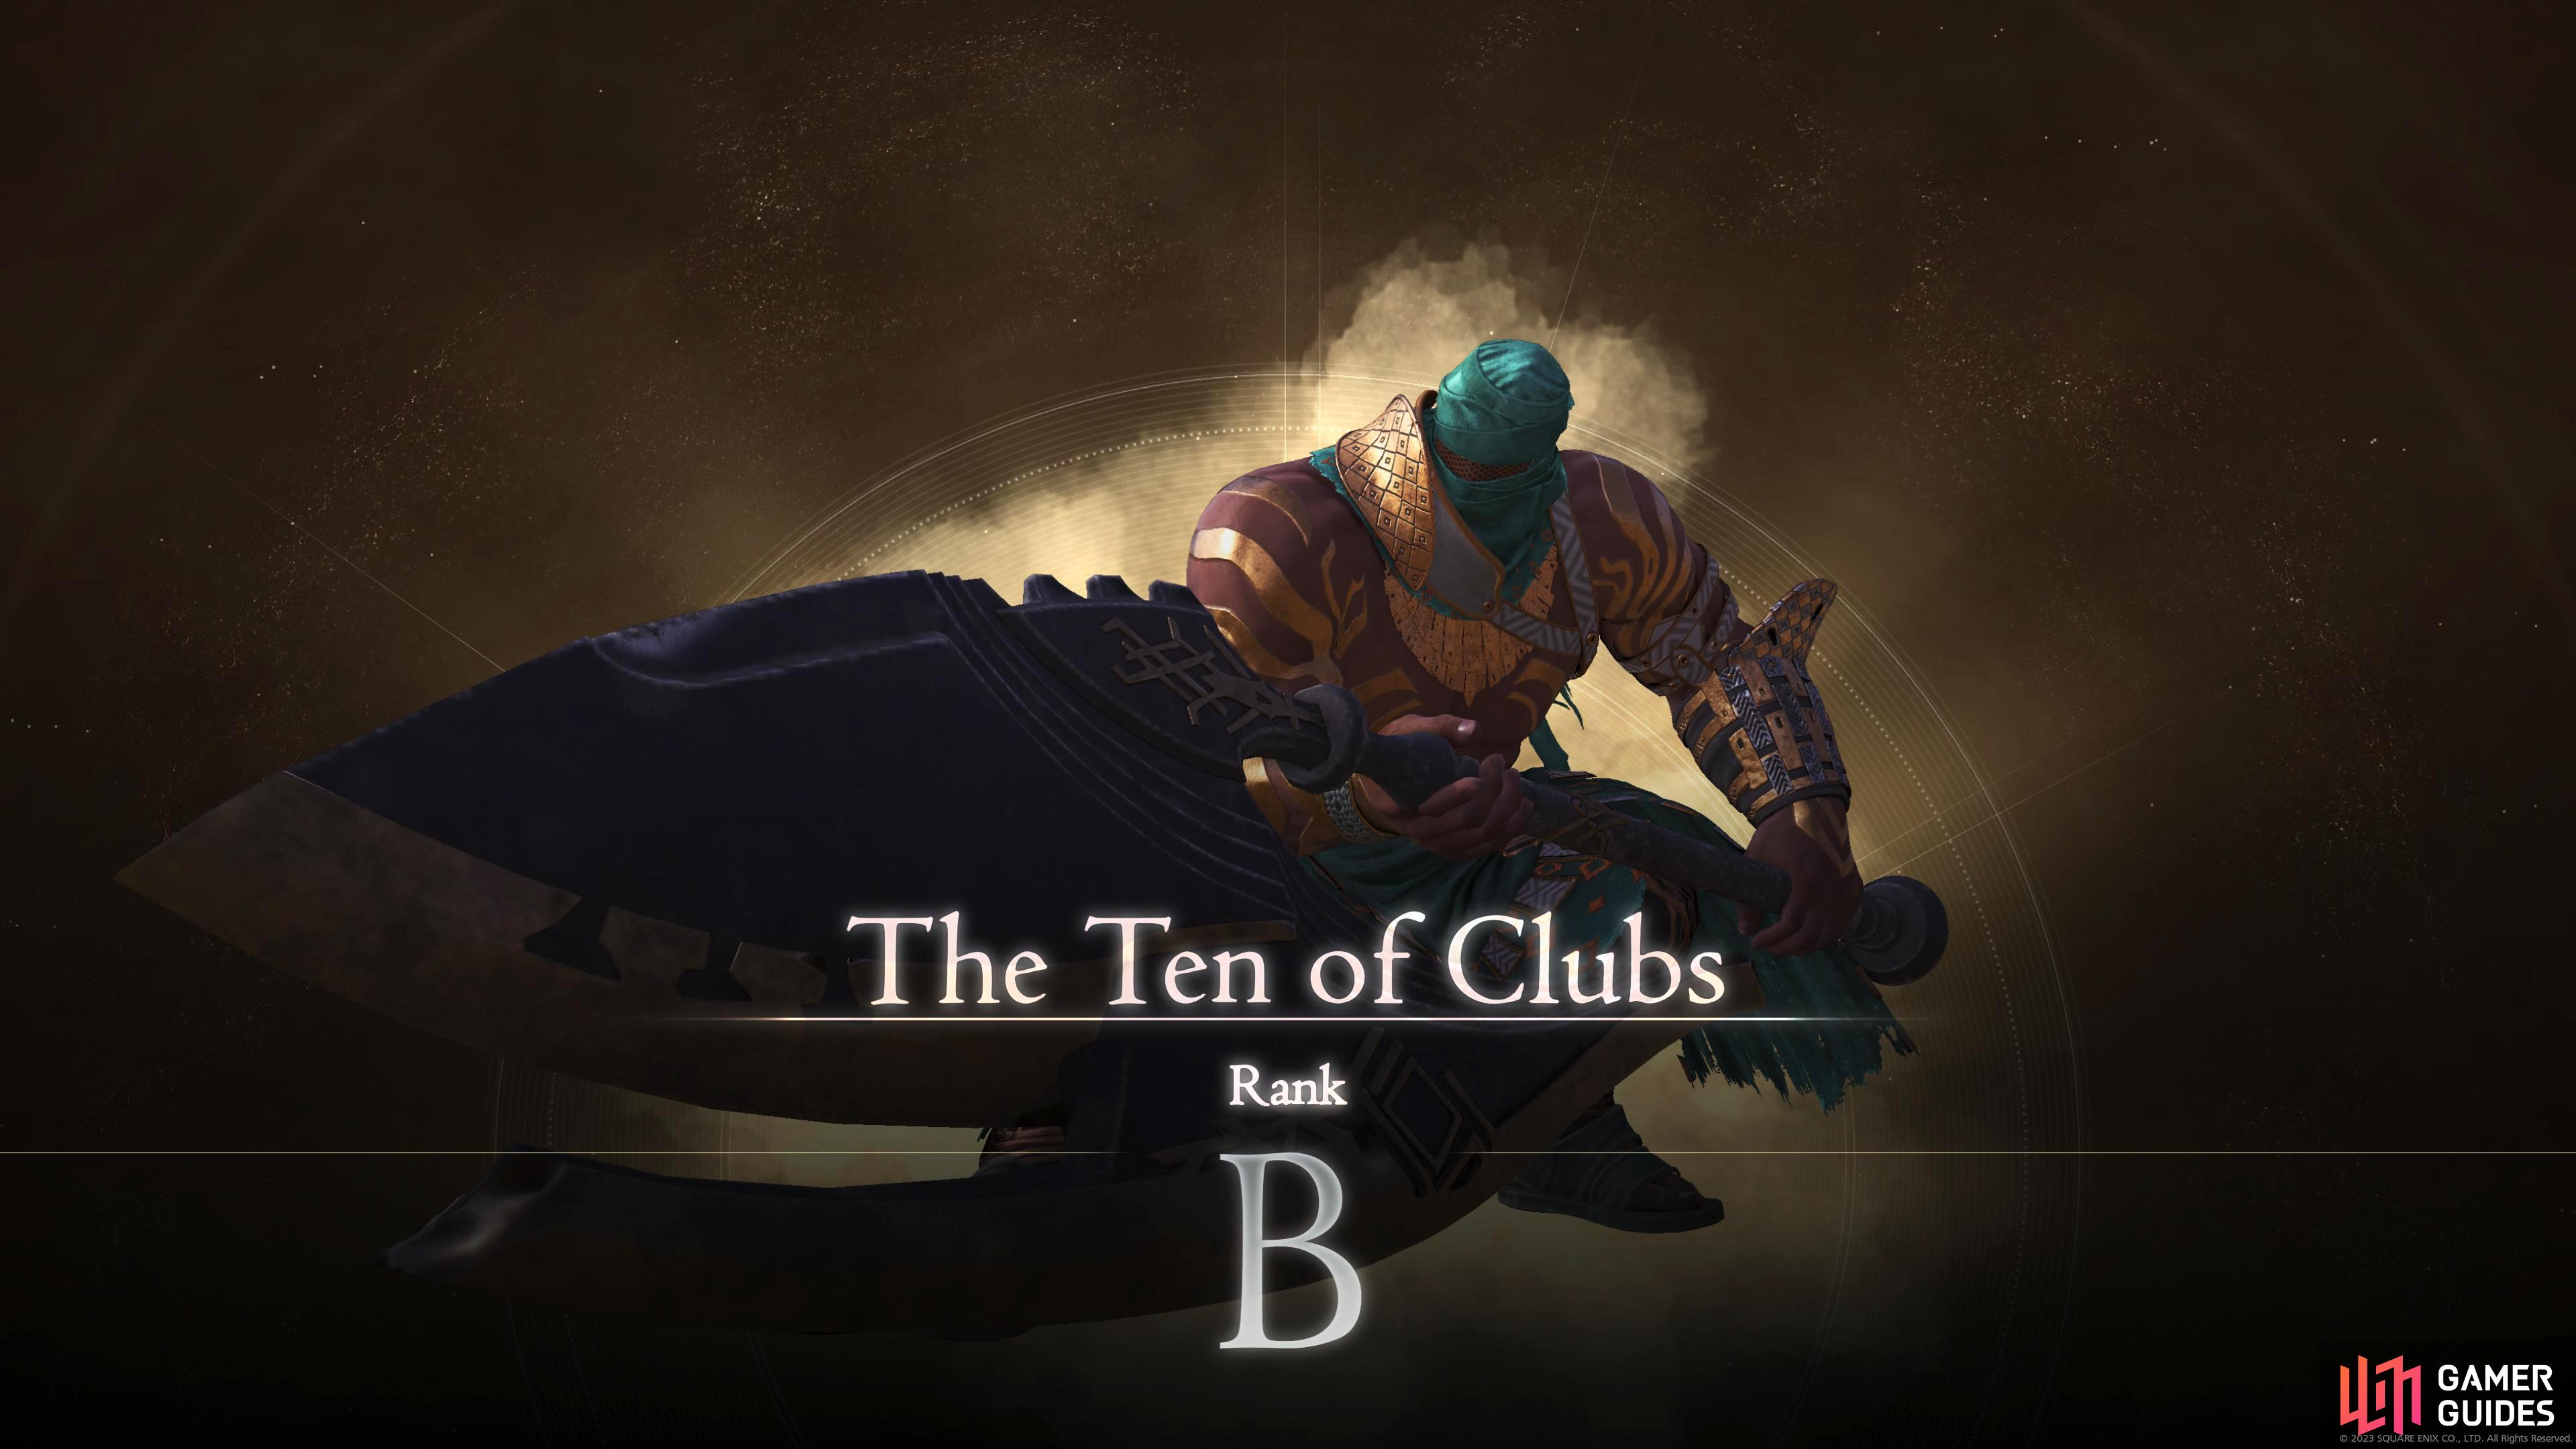 The Ten of Clubs Hunt is accessed during the Things Fall Apart main scenario quest.